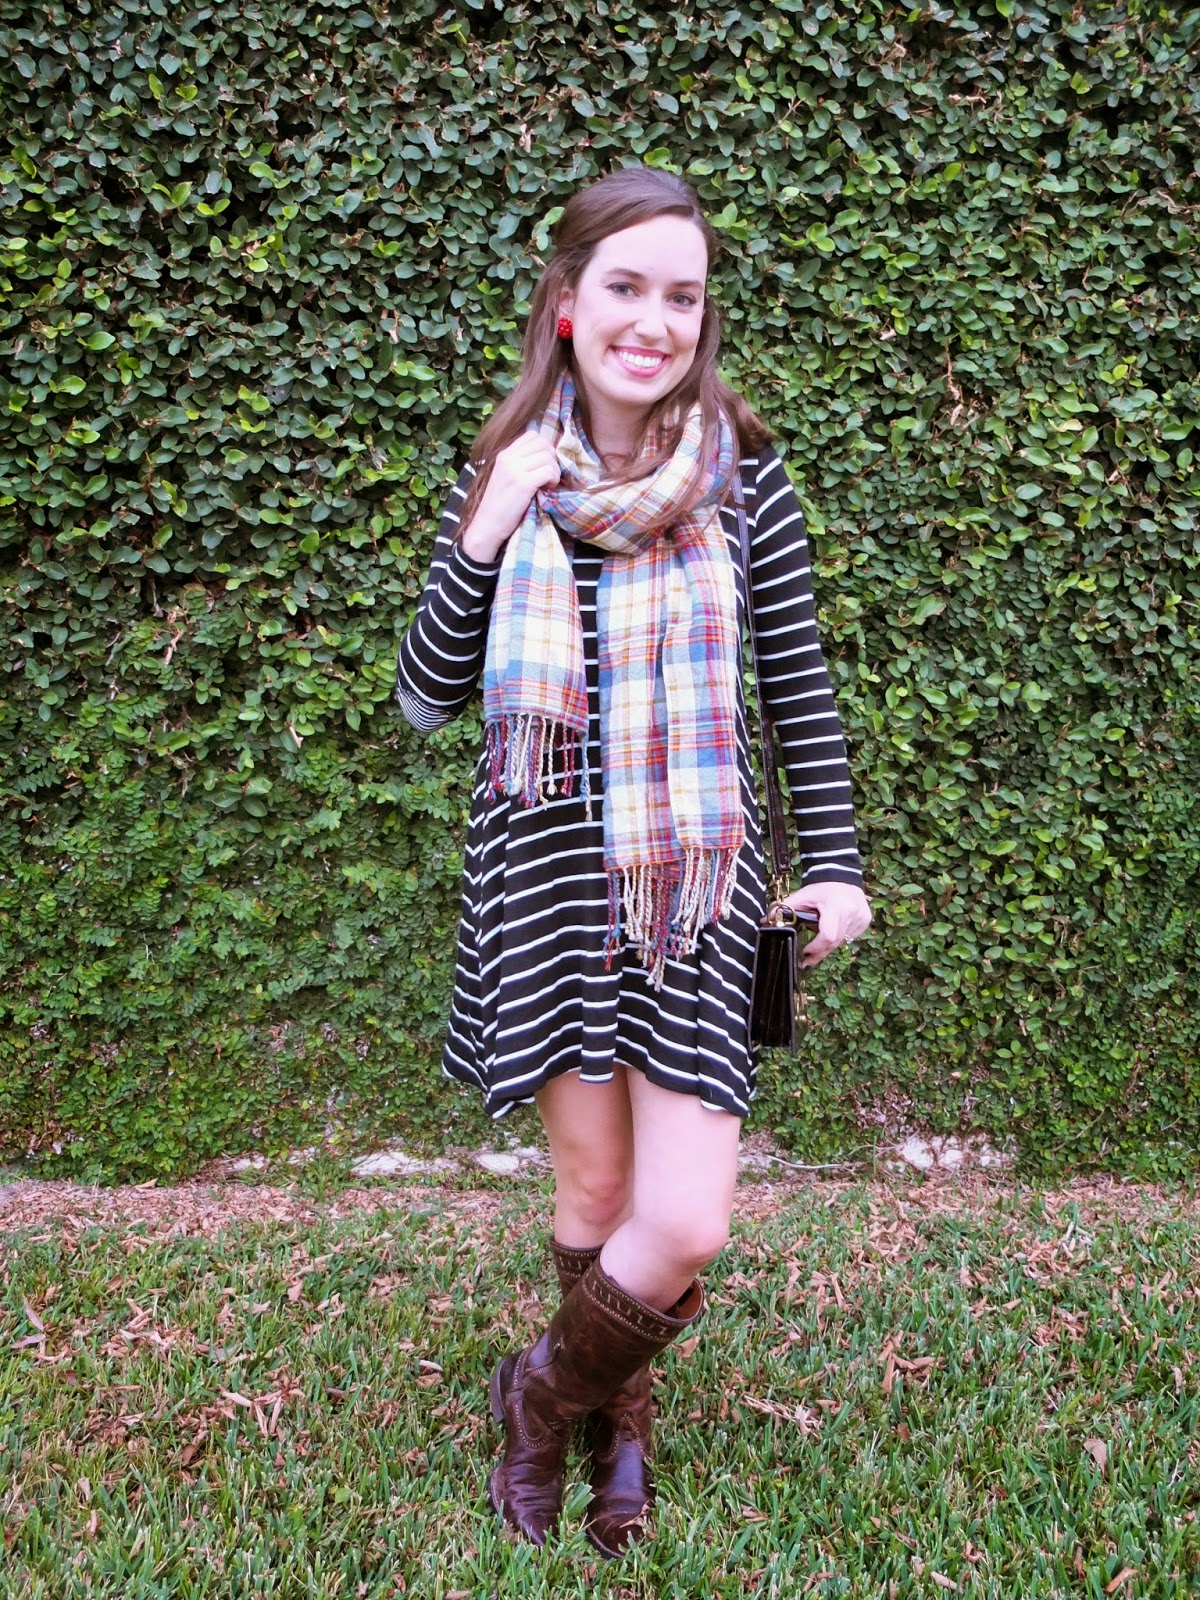 Ariat Sahara Boots, Anthropologie Striped Dress, Striped Dress and Plaid Scarf, Anthropologie black and white striped dress blog, Lisi Lerch Button Earrings, Ariat Sahara, Sahara Boots